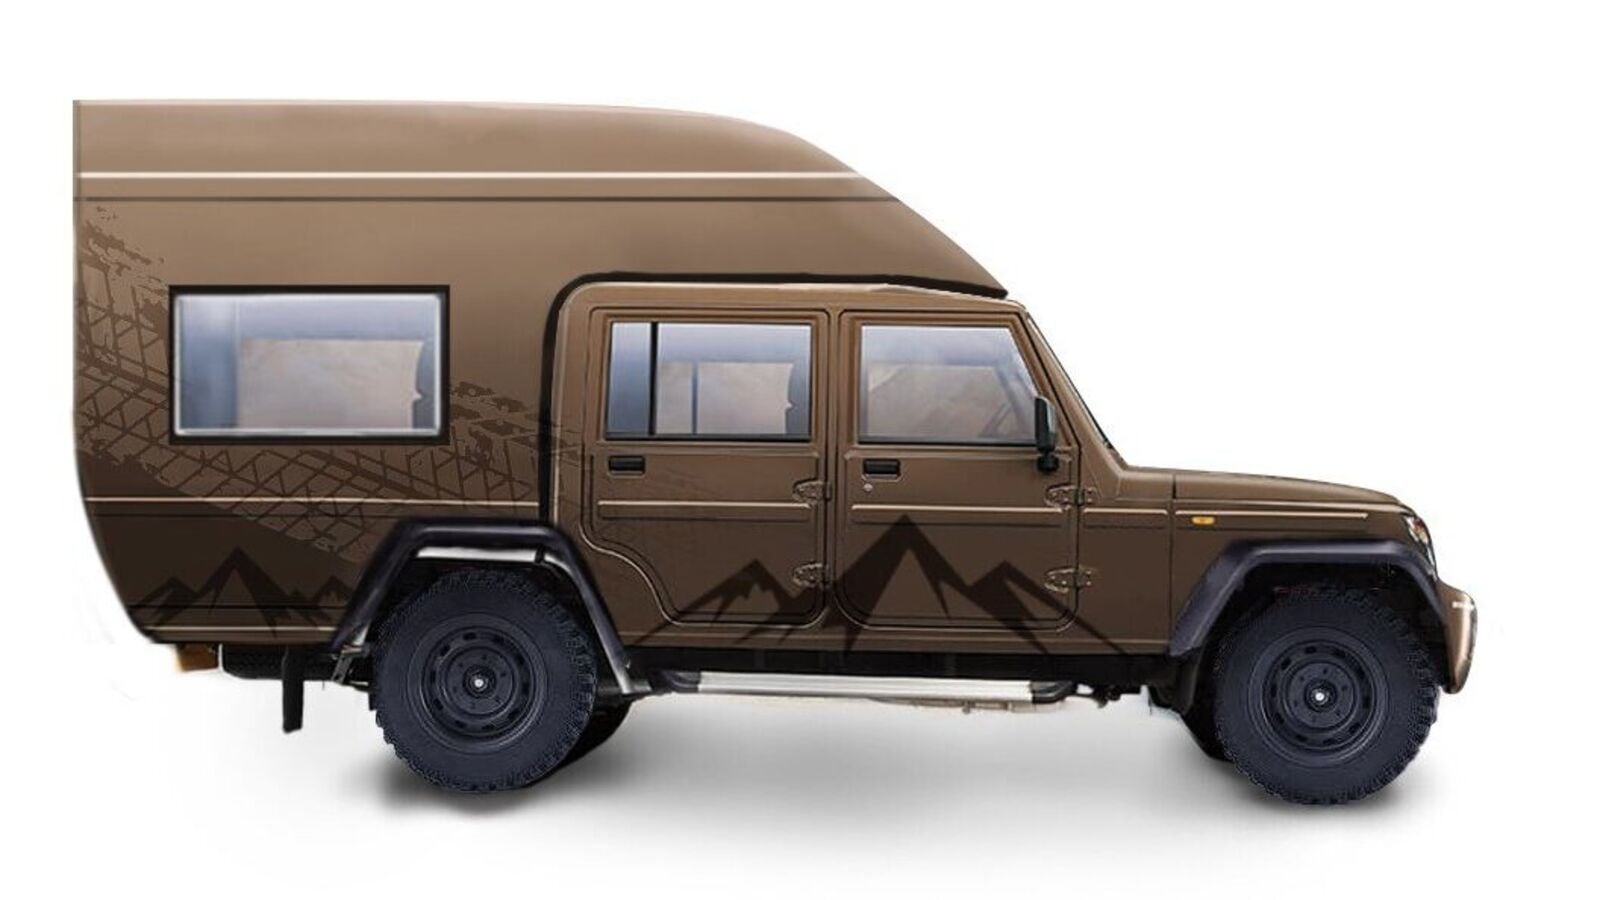 Mahindra Bolero luxury camper vehicle coming soon, complete with room for 4